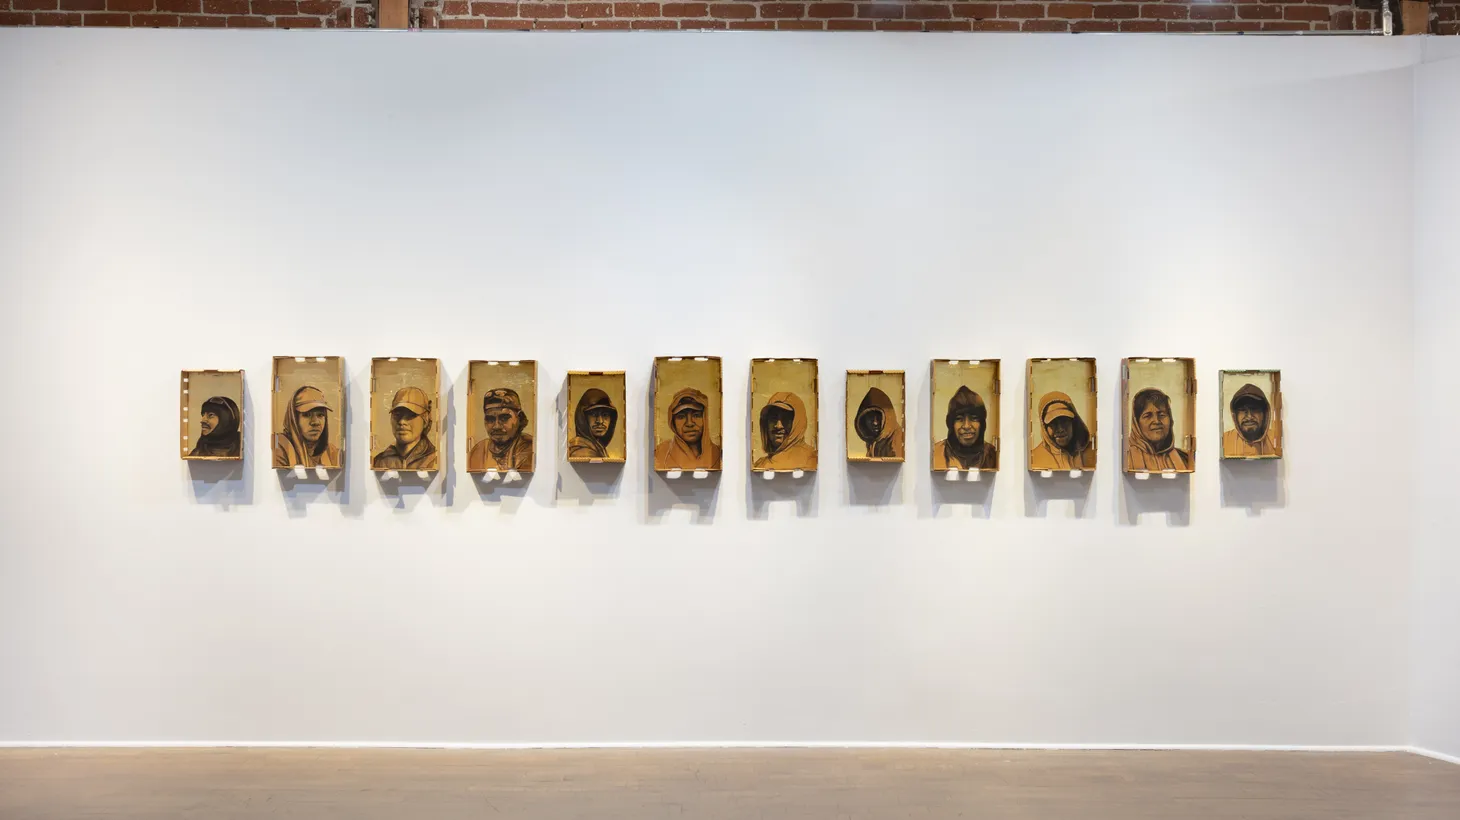 Artist Narsiso Martinez uses a series of portraits of farm workers to talk about the agriculture industry. His work is part of the exhibit called "Many” at Craft Contemporary.